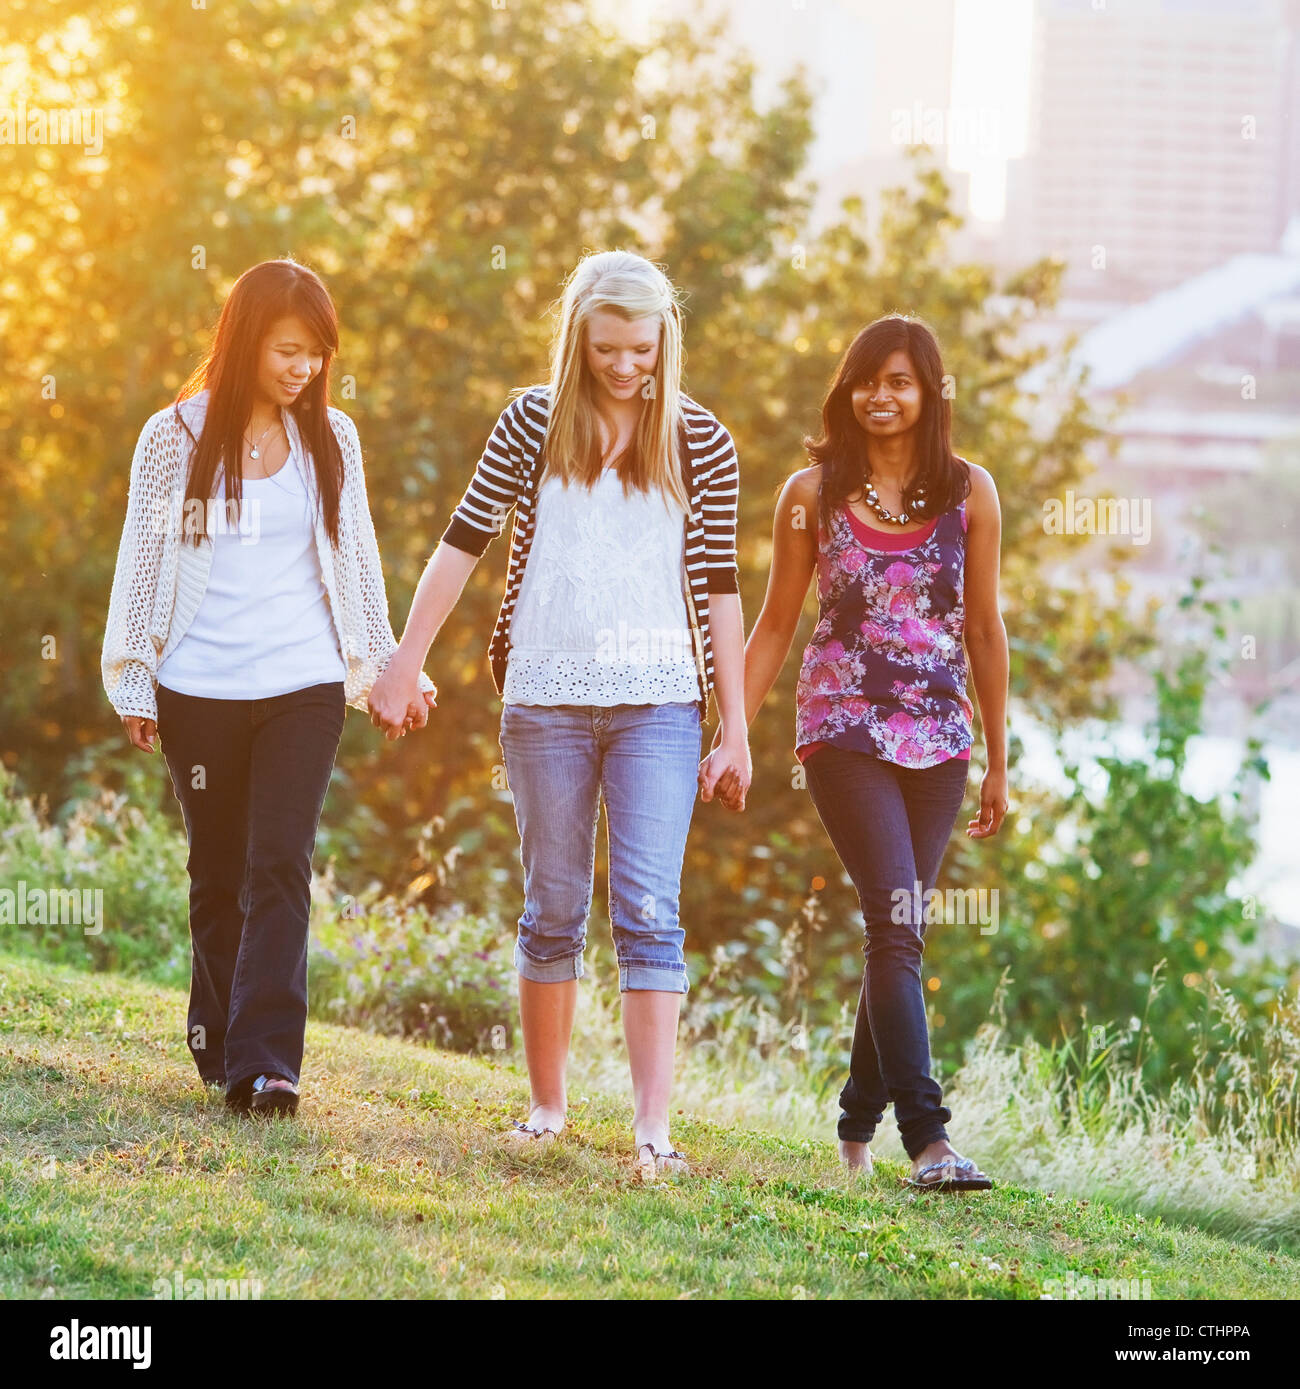 Friends Walking In A City Park At Dusk With The City Skyline In The Background; Edmonton, Alberta, Canada Stock Photo